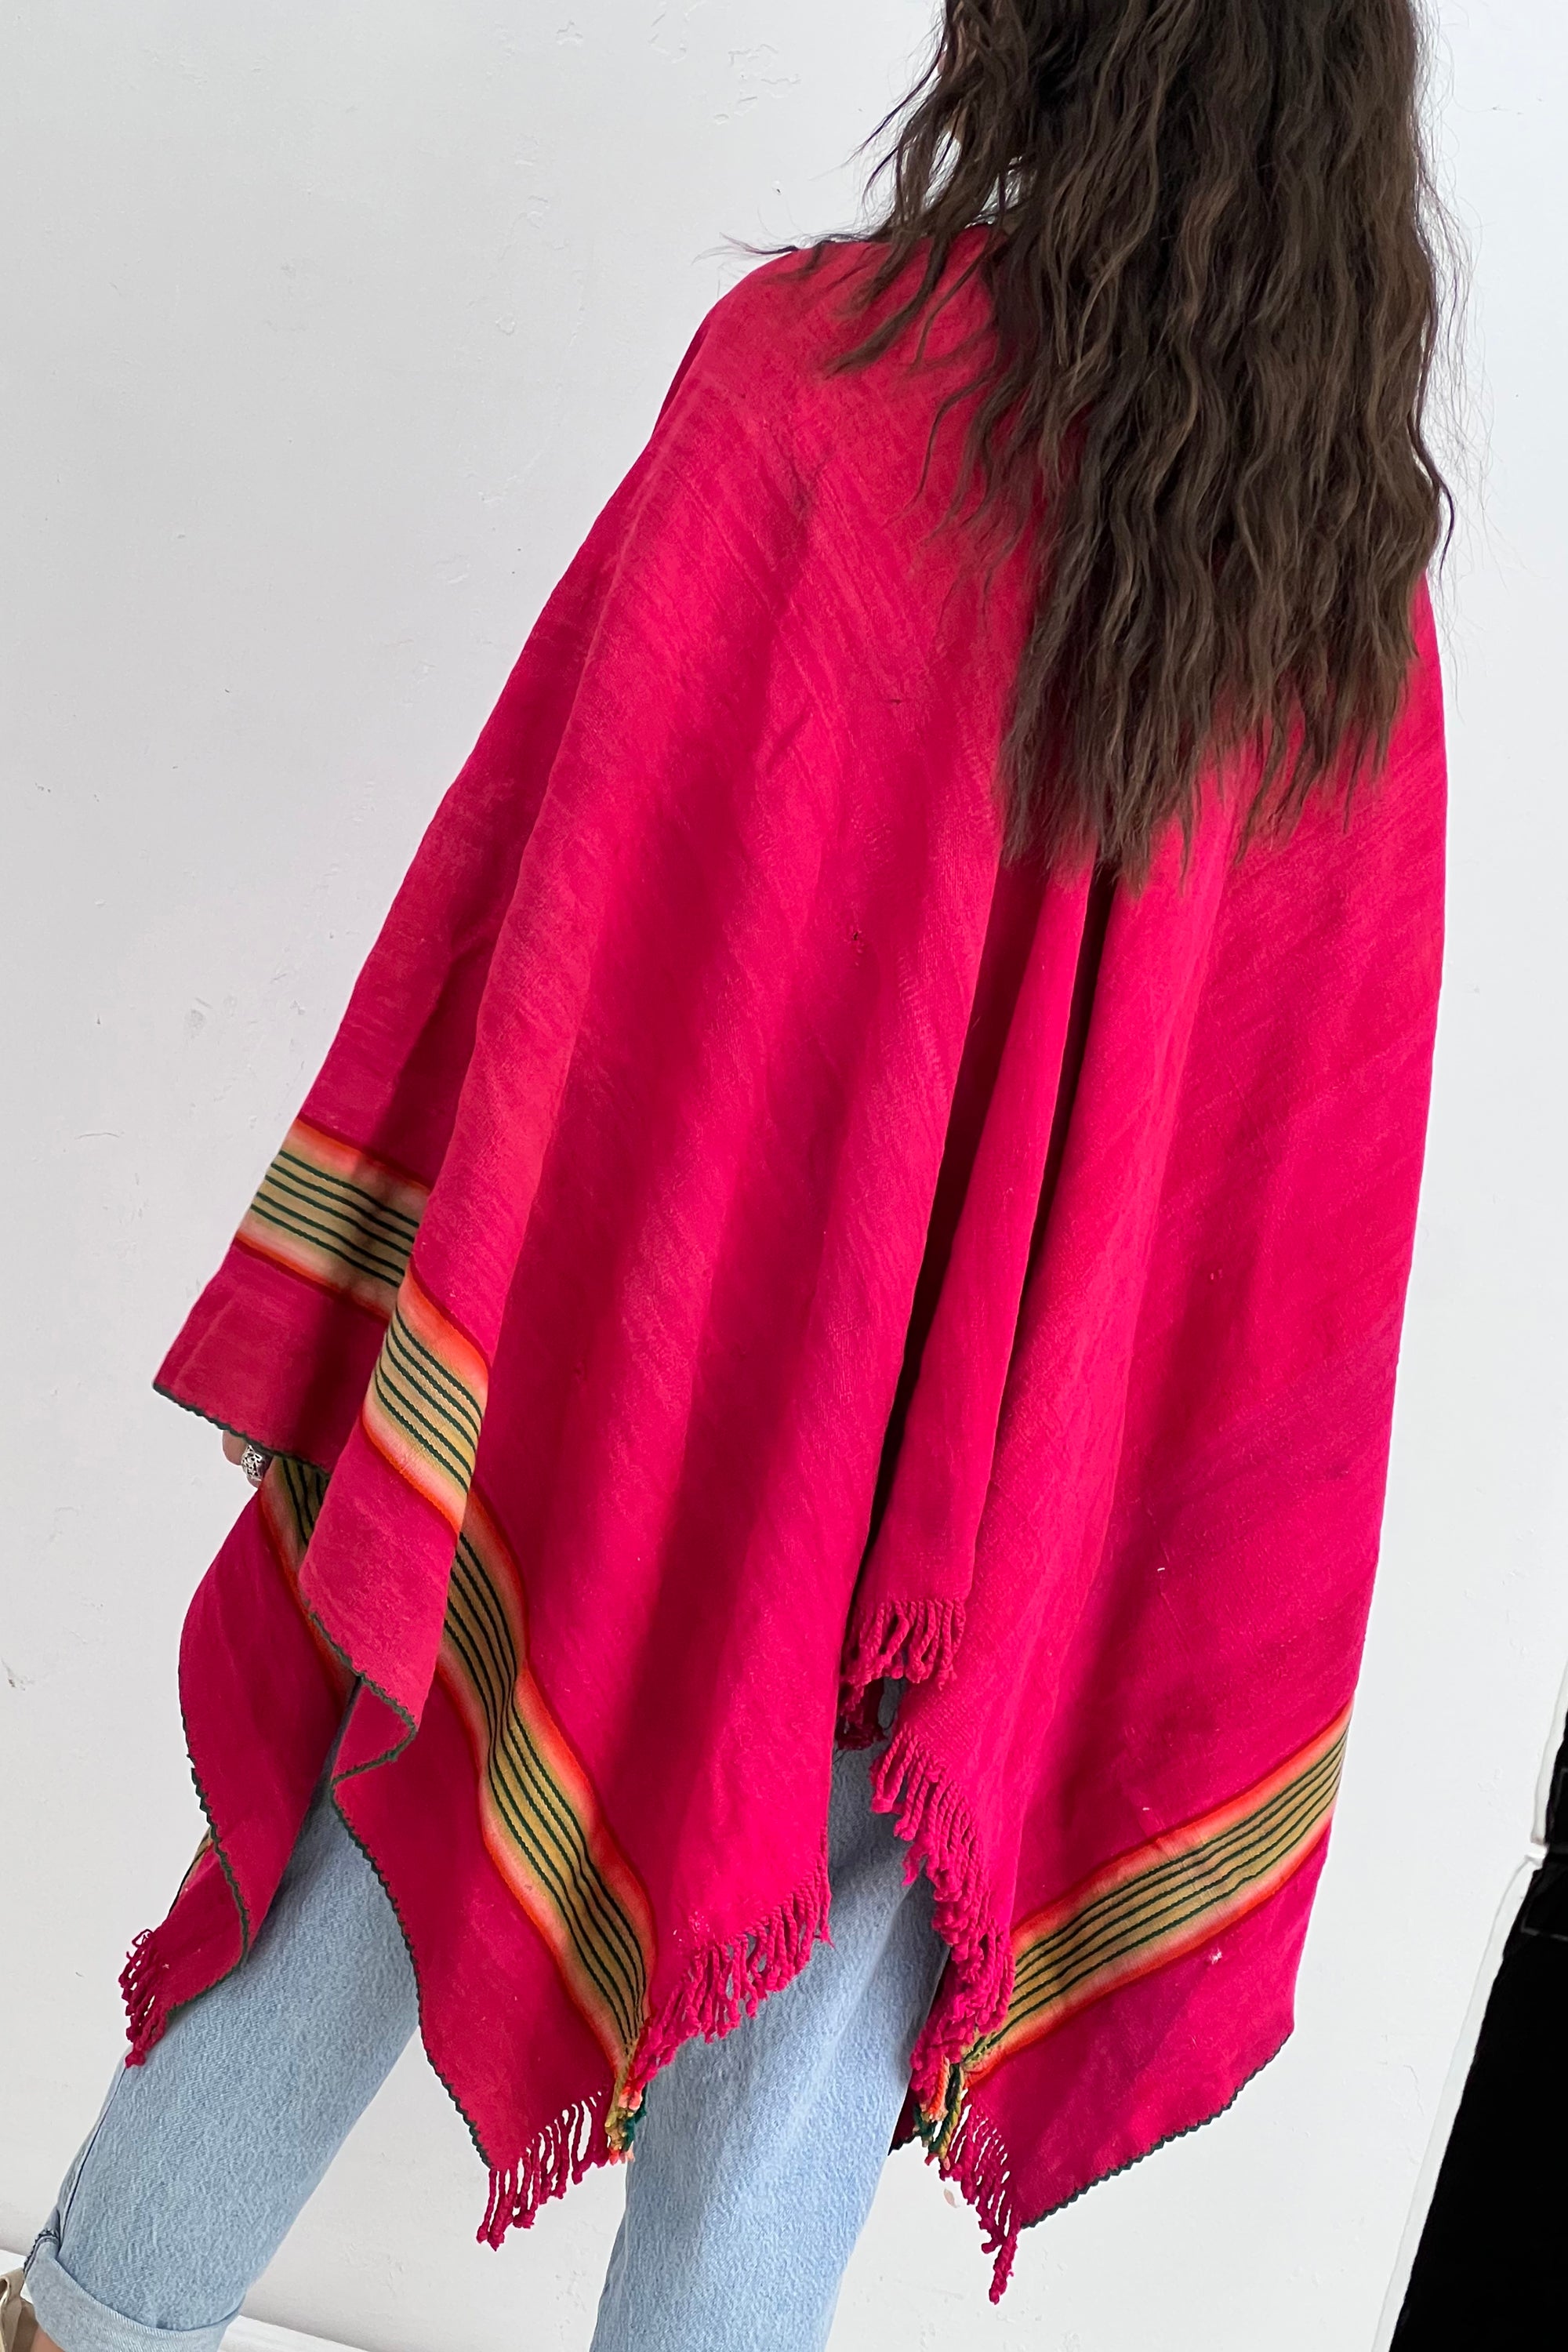 Vintage Hand Woven Wool Poncho Selected by Anna Corinna